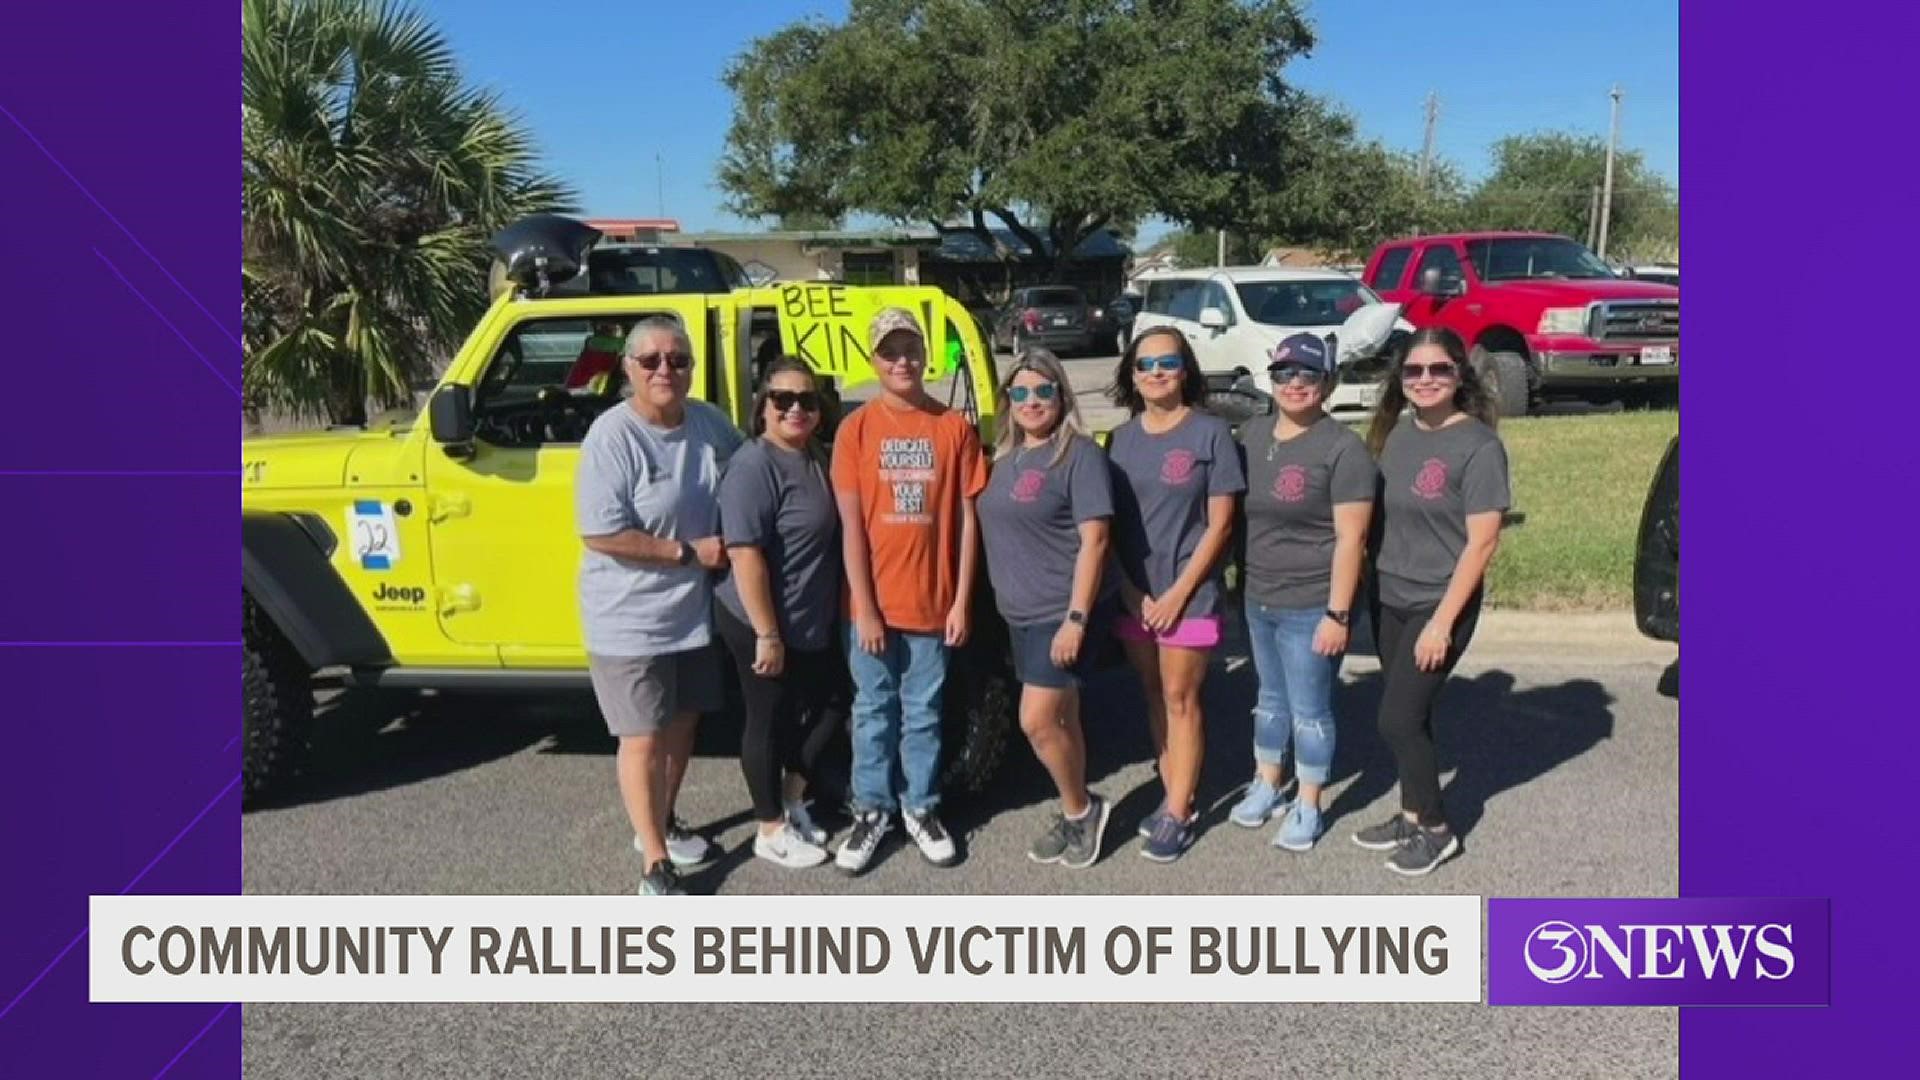 After a video of the bullying was shared online, the community made sure he knew he was loved and supported.